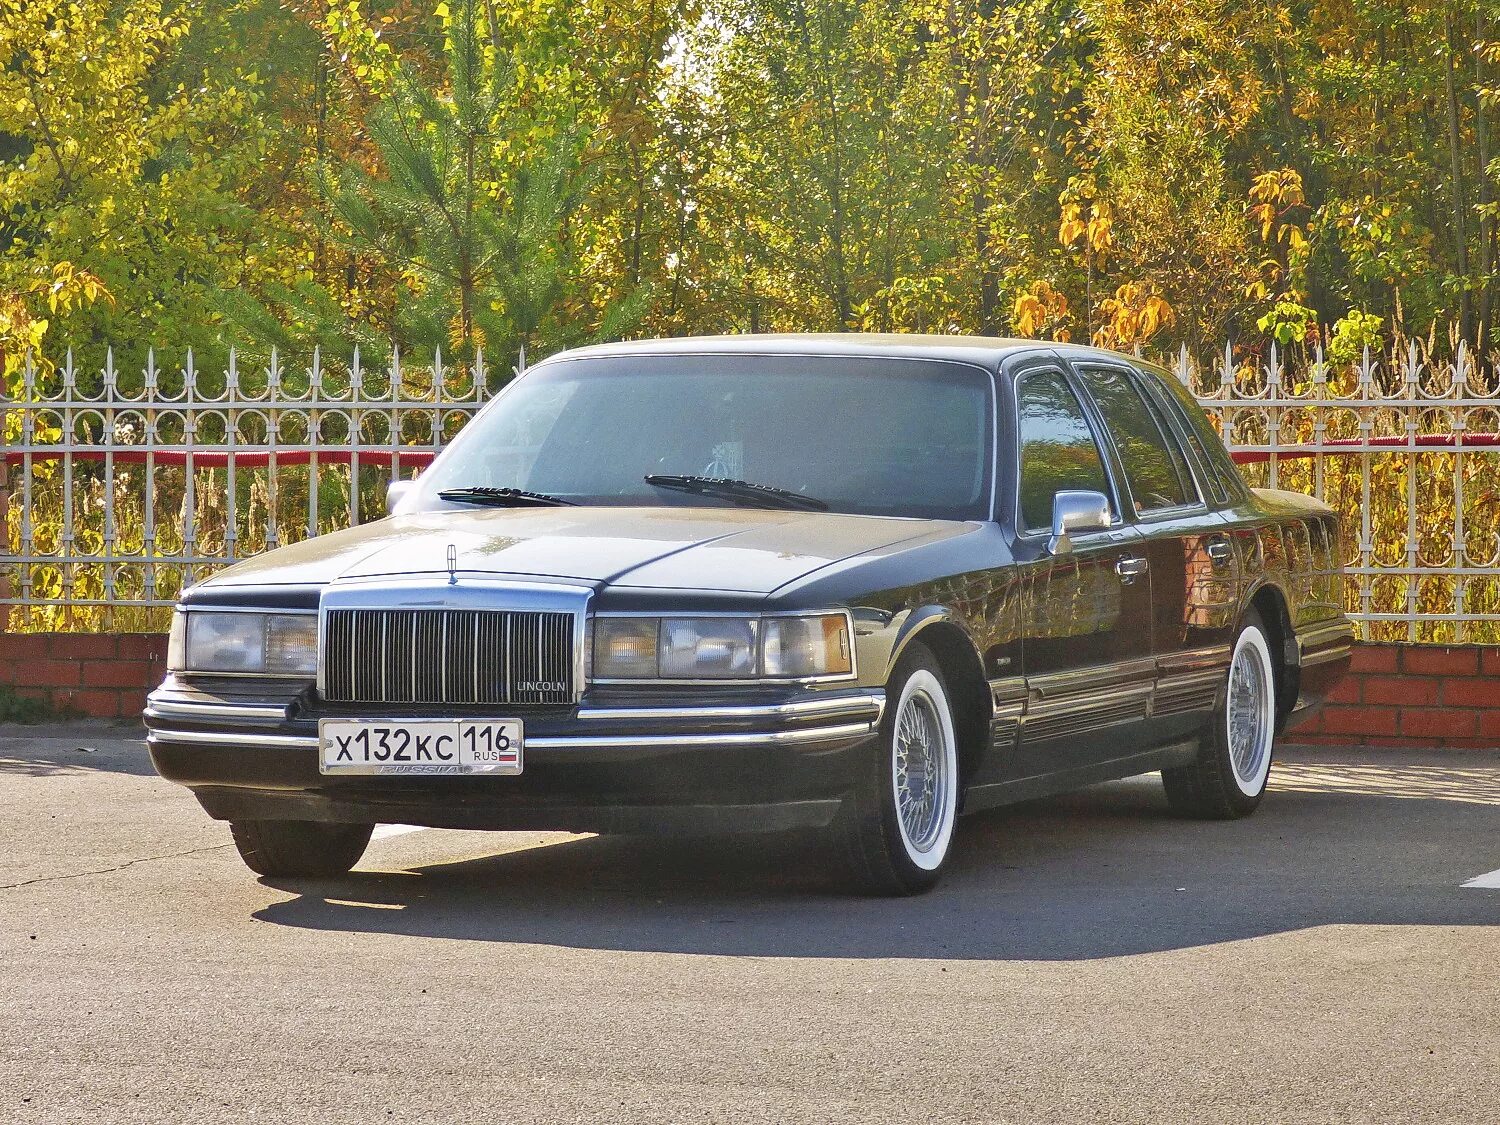 Таун кар 2. Lincoln Town car 2. Lincoln Town car 1994. Lincoln Town car 1992. Lincoln Town car 1990-1997.